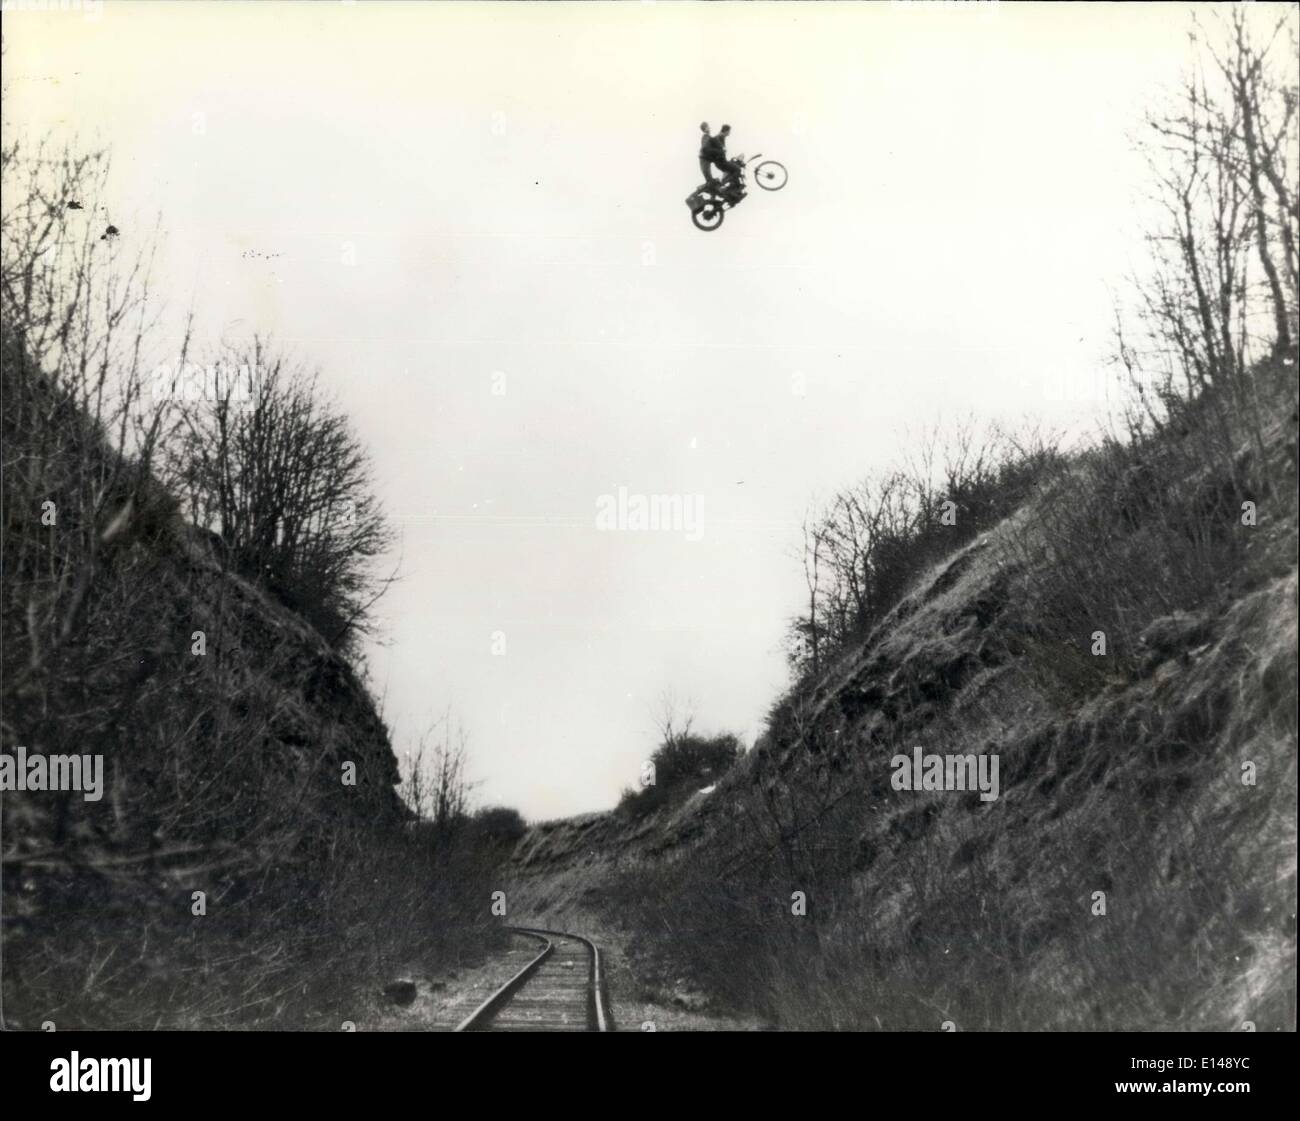 Apr. 17, 2012 - Eddie Kidd on his flying machine: 18 year old Eddie Kidd, excelled even his own daredevil exploits, when he soared 145 feet across a railway cutting with a dummy strapped to the seat of his bike. The daring jump across the railway track 80 feet below him, took place at Shepton Mallet in Somerset, was part of a scene from a new war film. Stock Photo